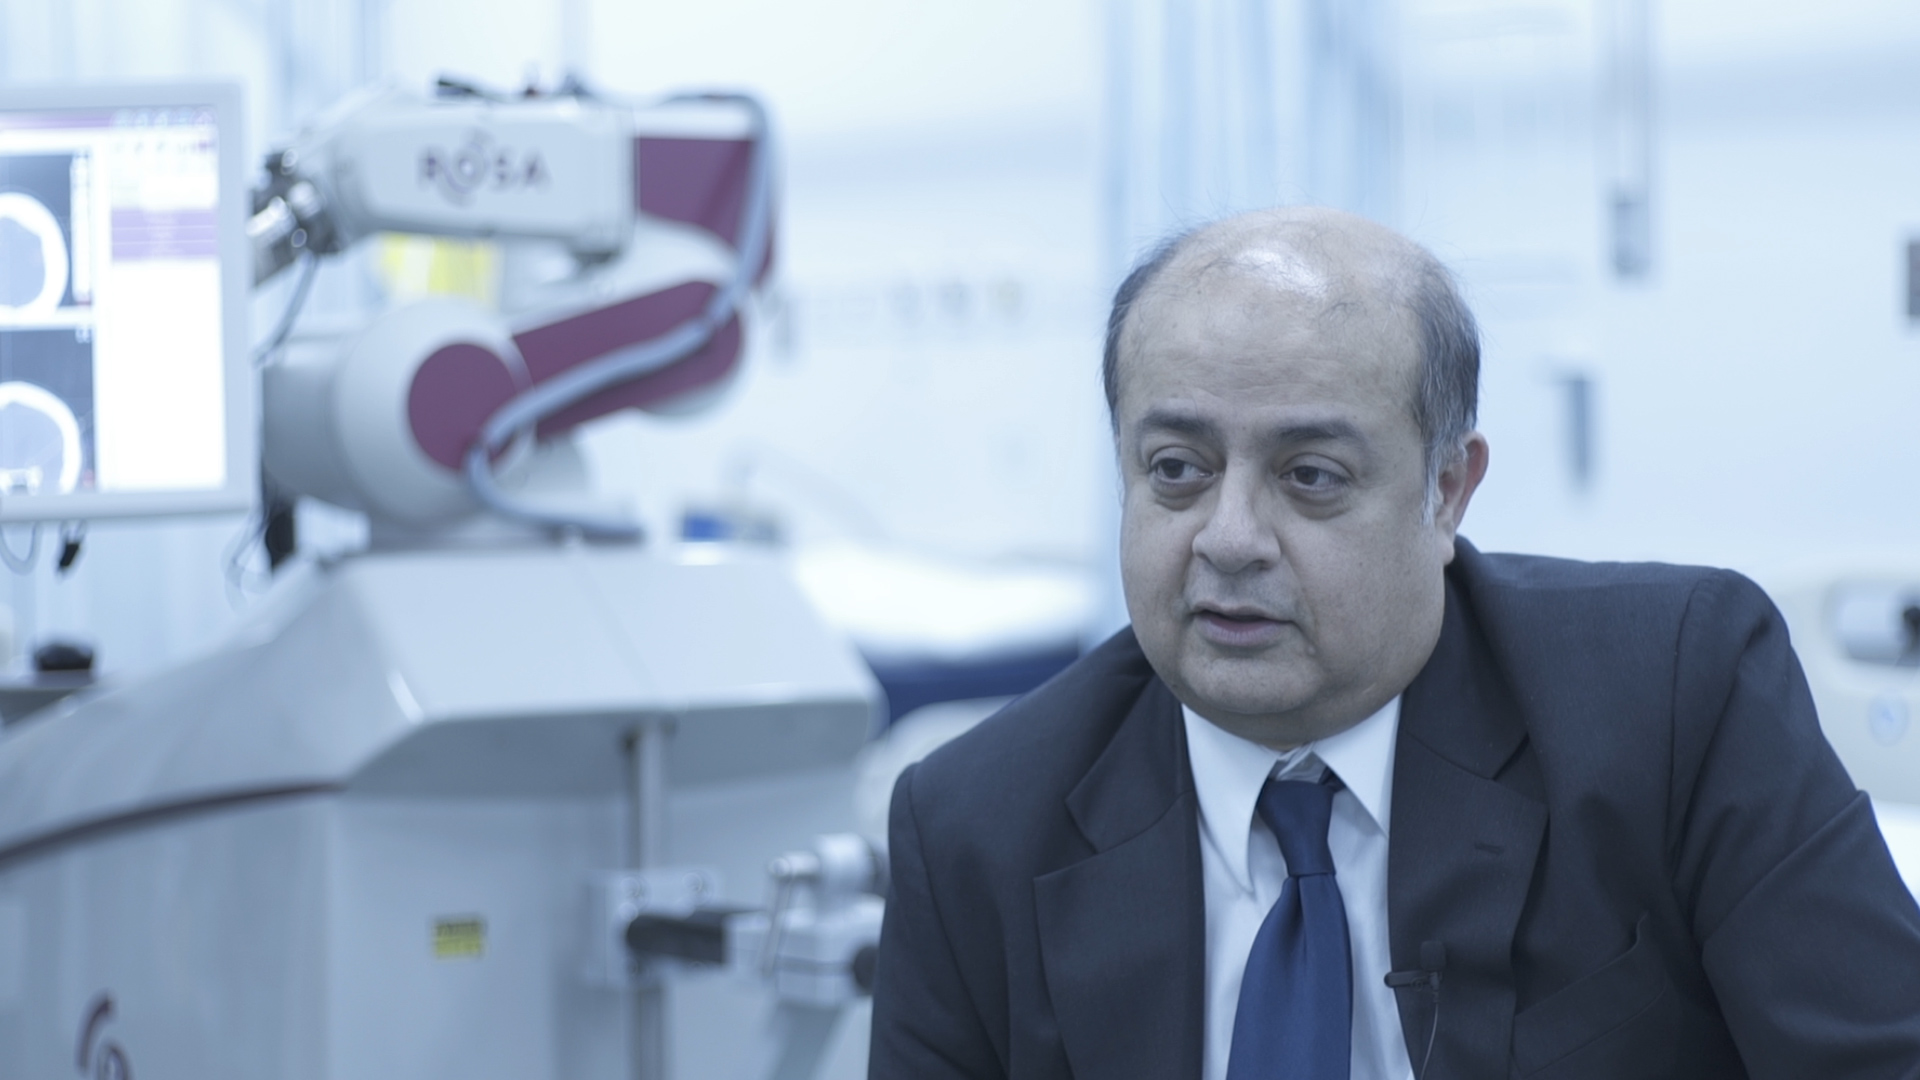 Consultant, Dev Bhattacharyya, will carry out operations using the new ROSA surgical assistant robot